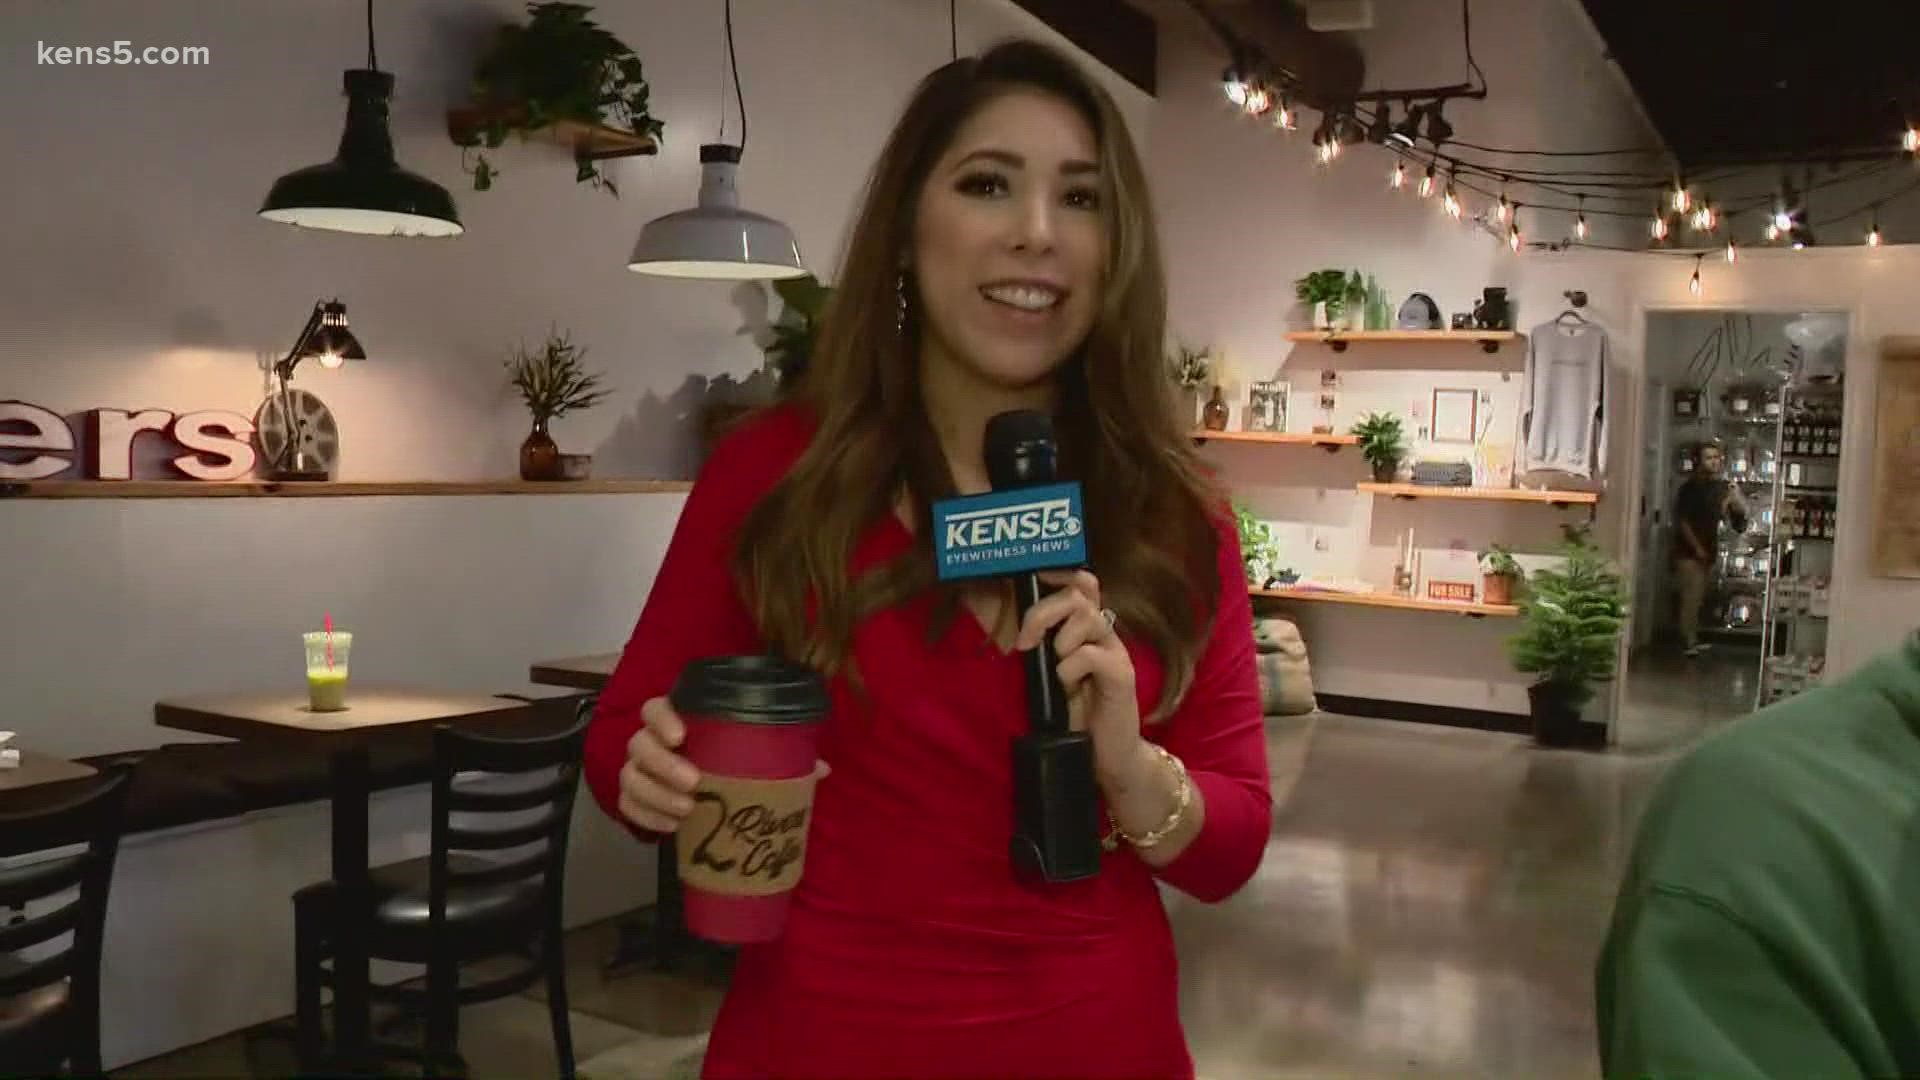 We've been going to places that viewers suggested has the best coffee!